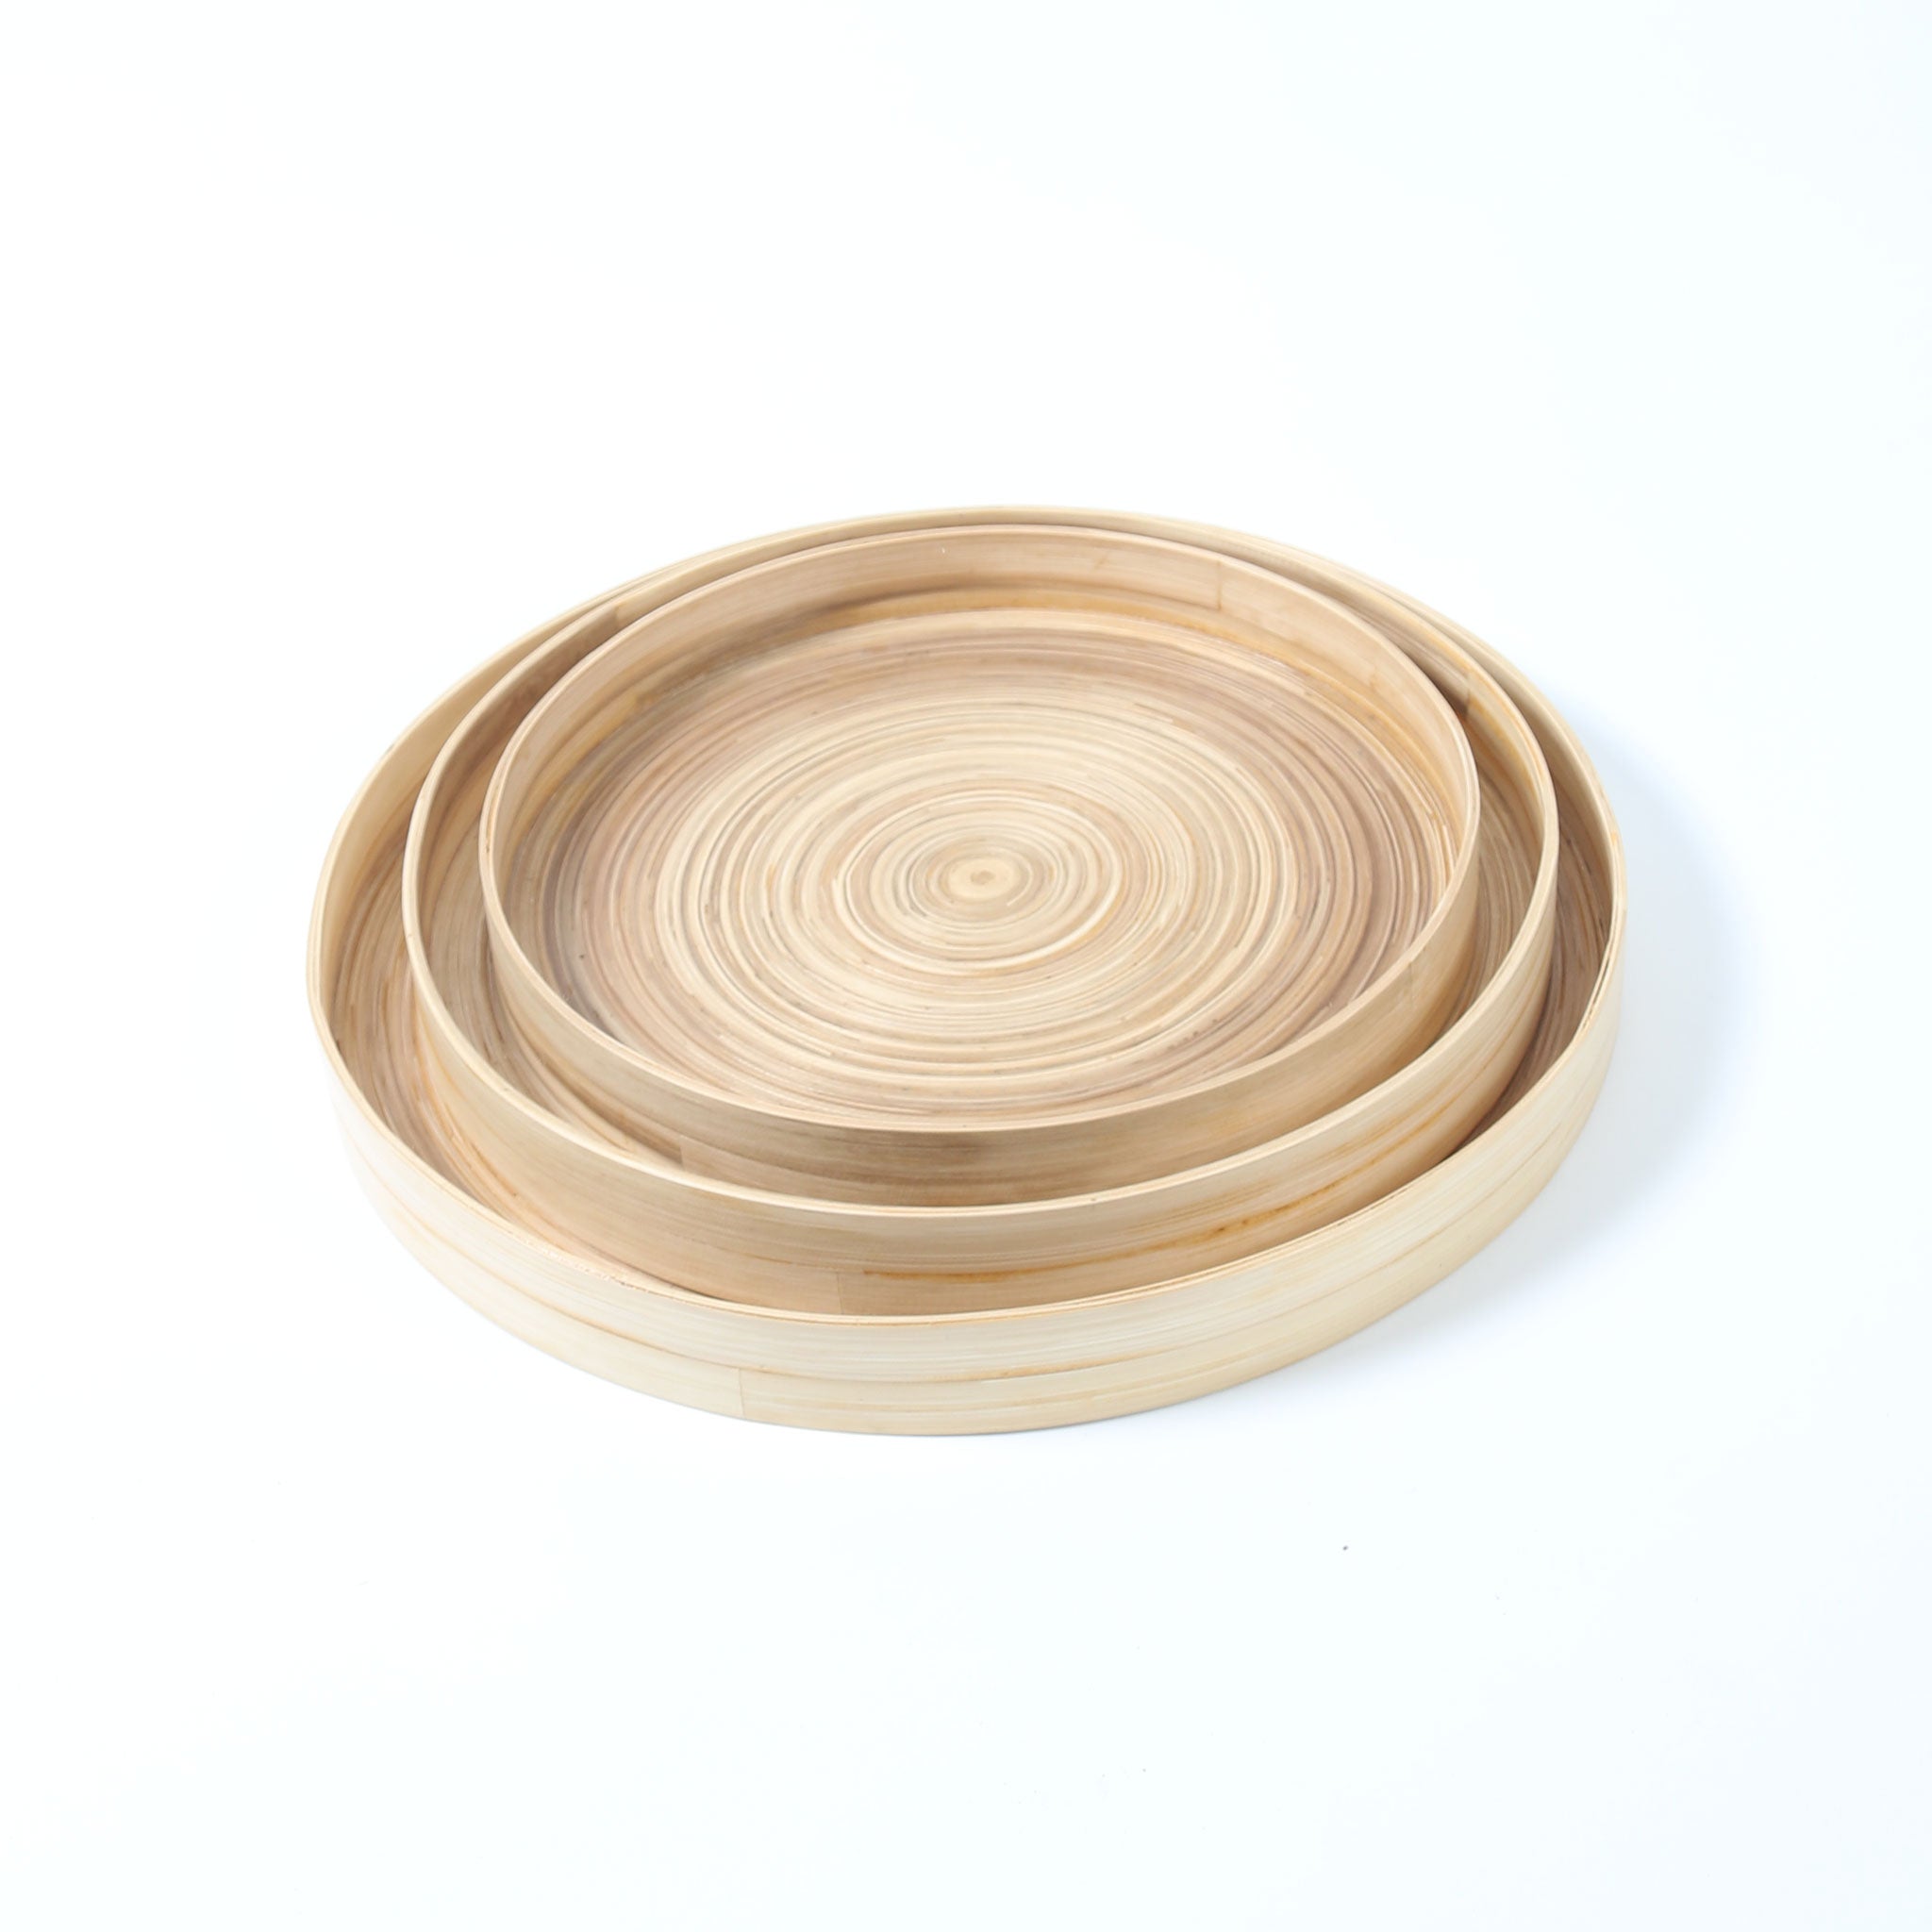 Laminated and Sustainable Bamboo Serving Tray